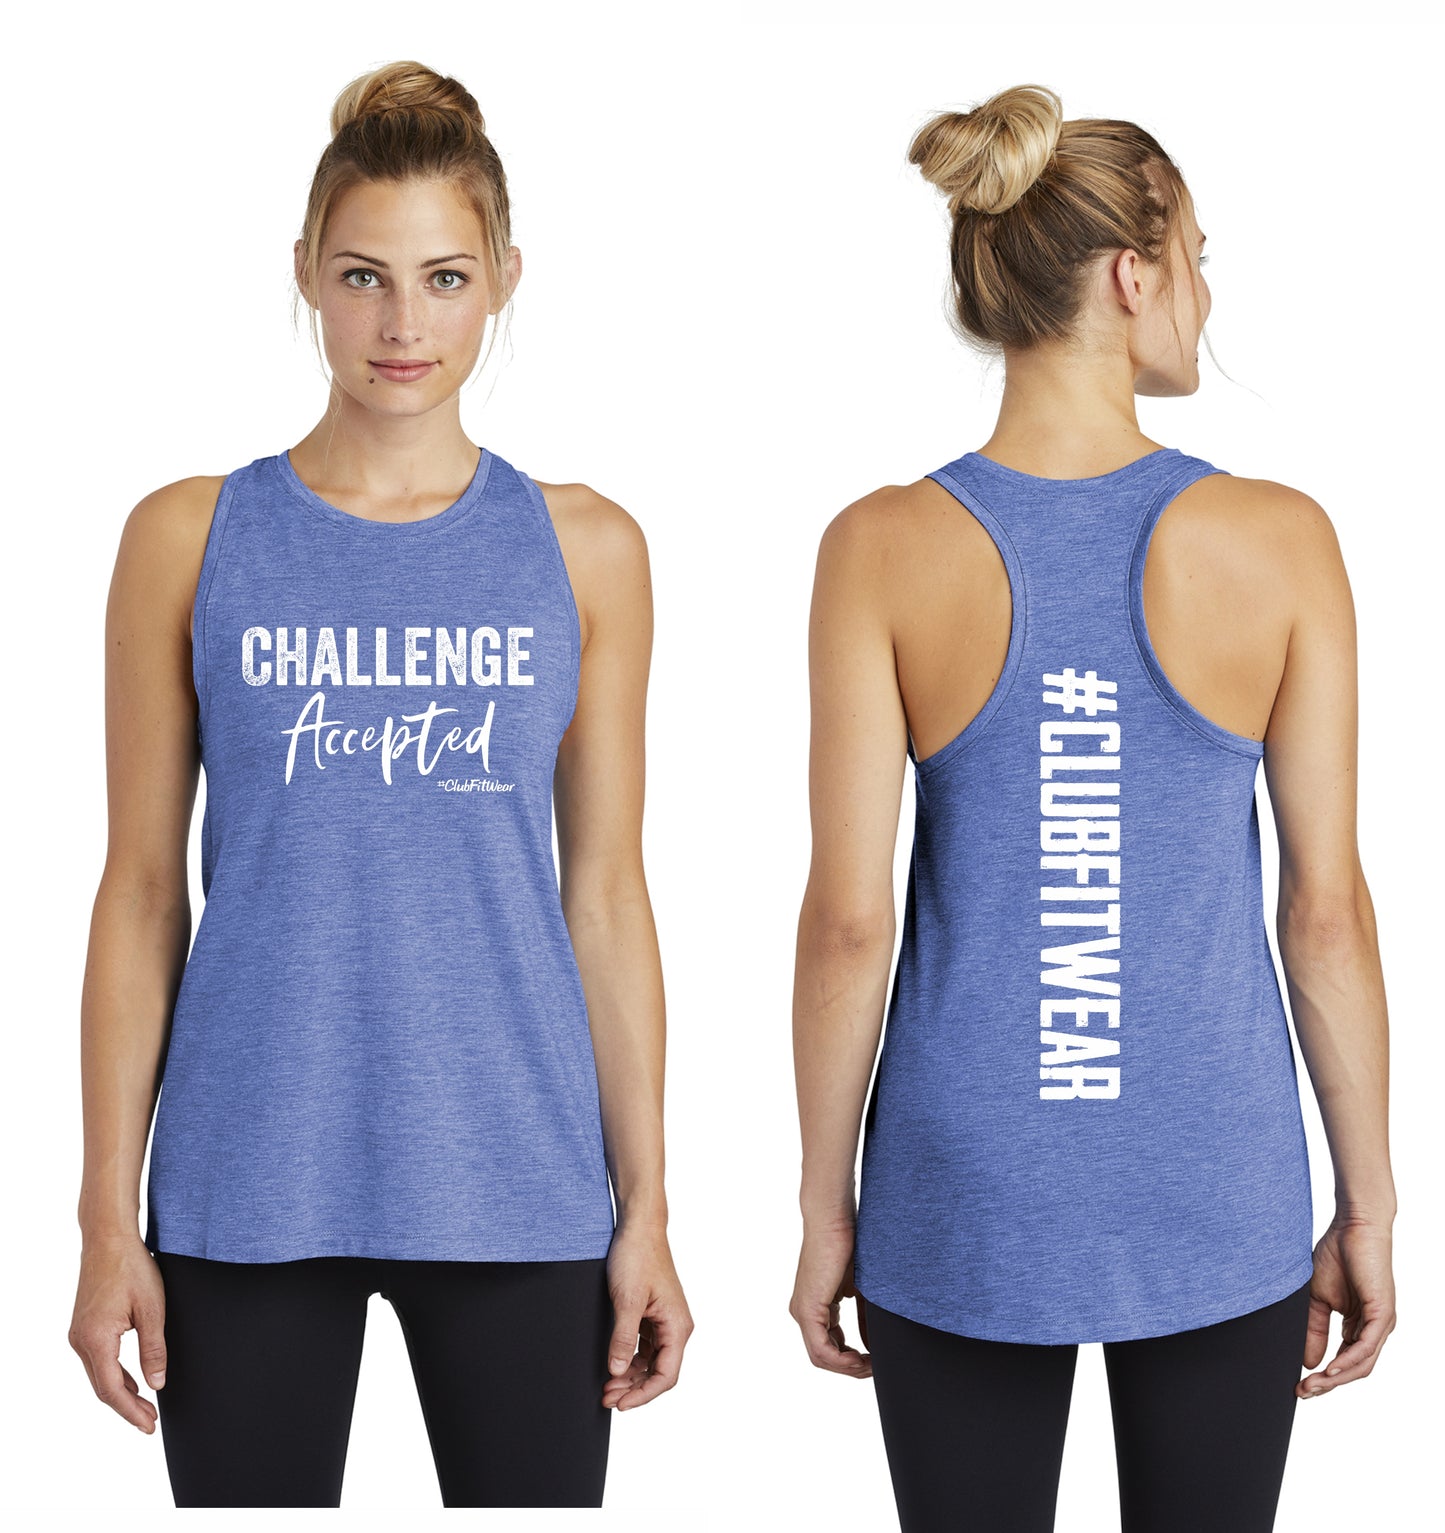 Challenge Accepted Racerback Muscle Tank